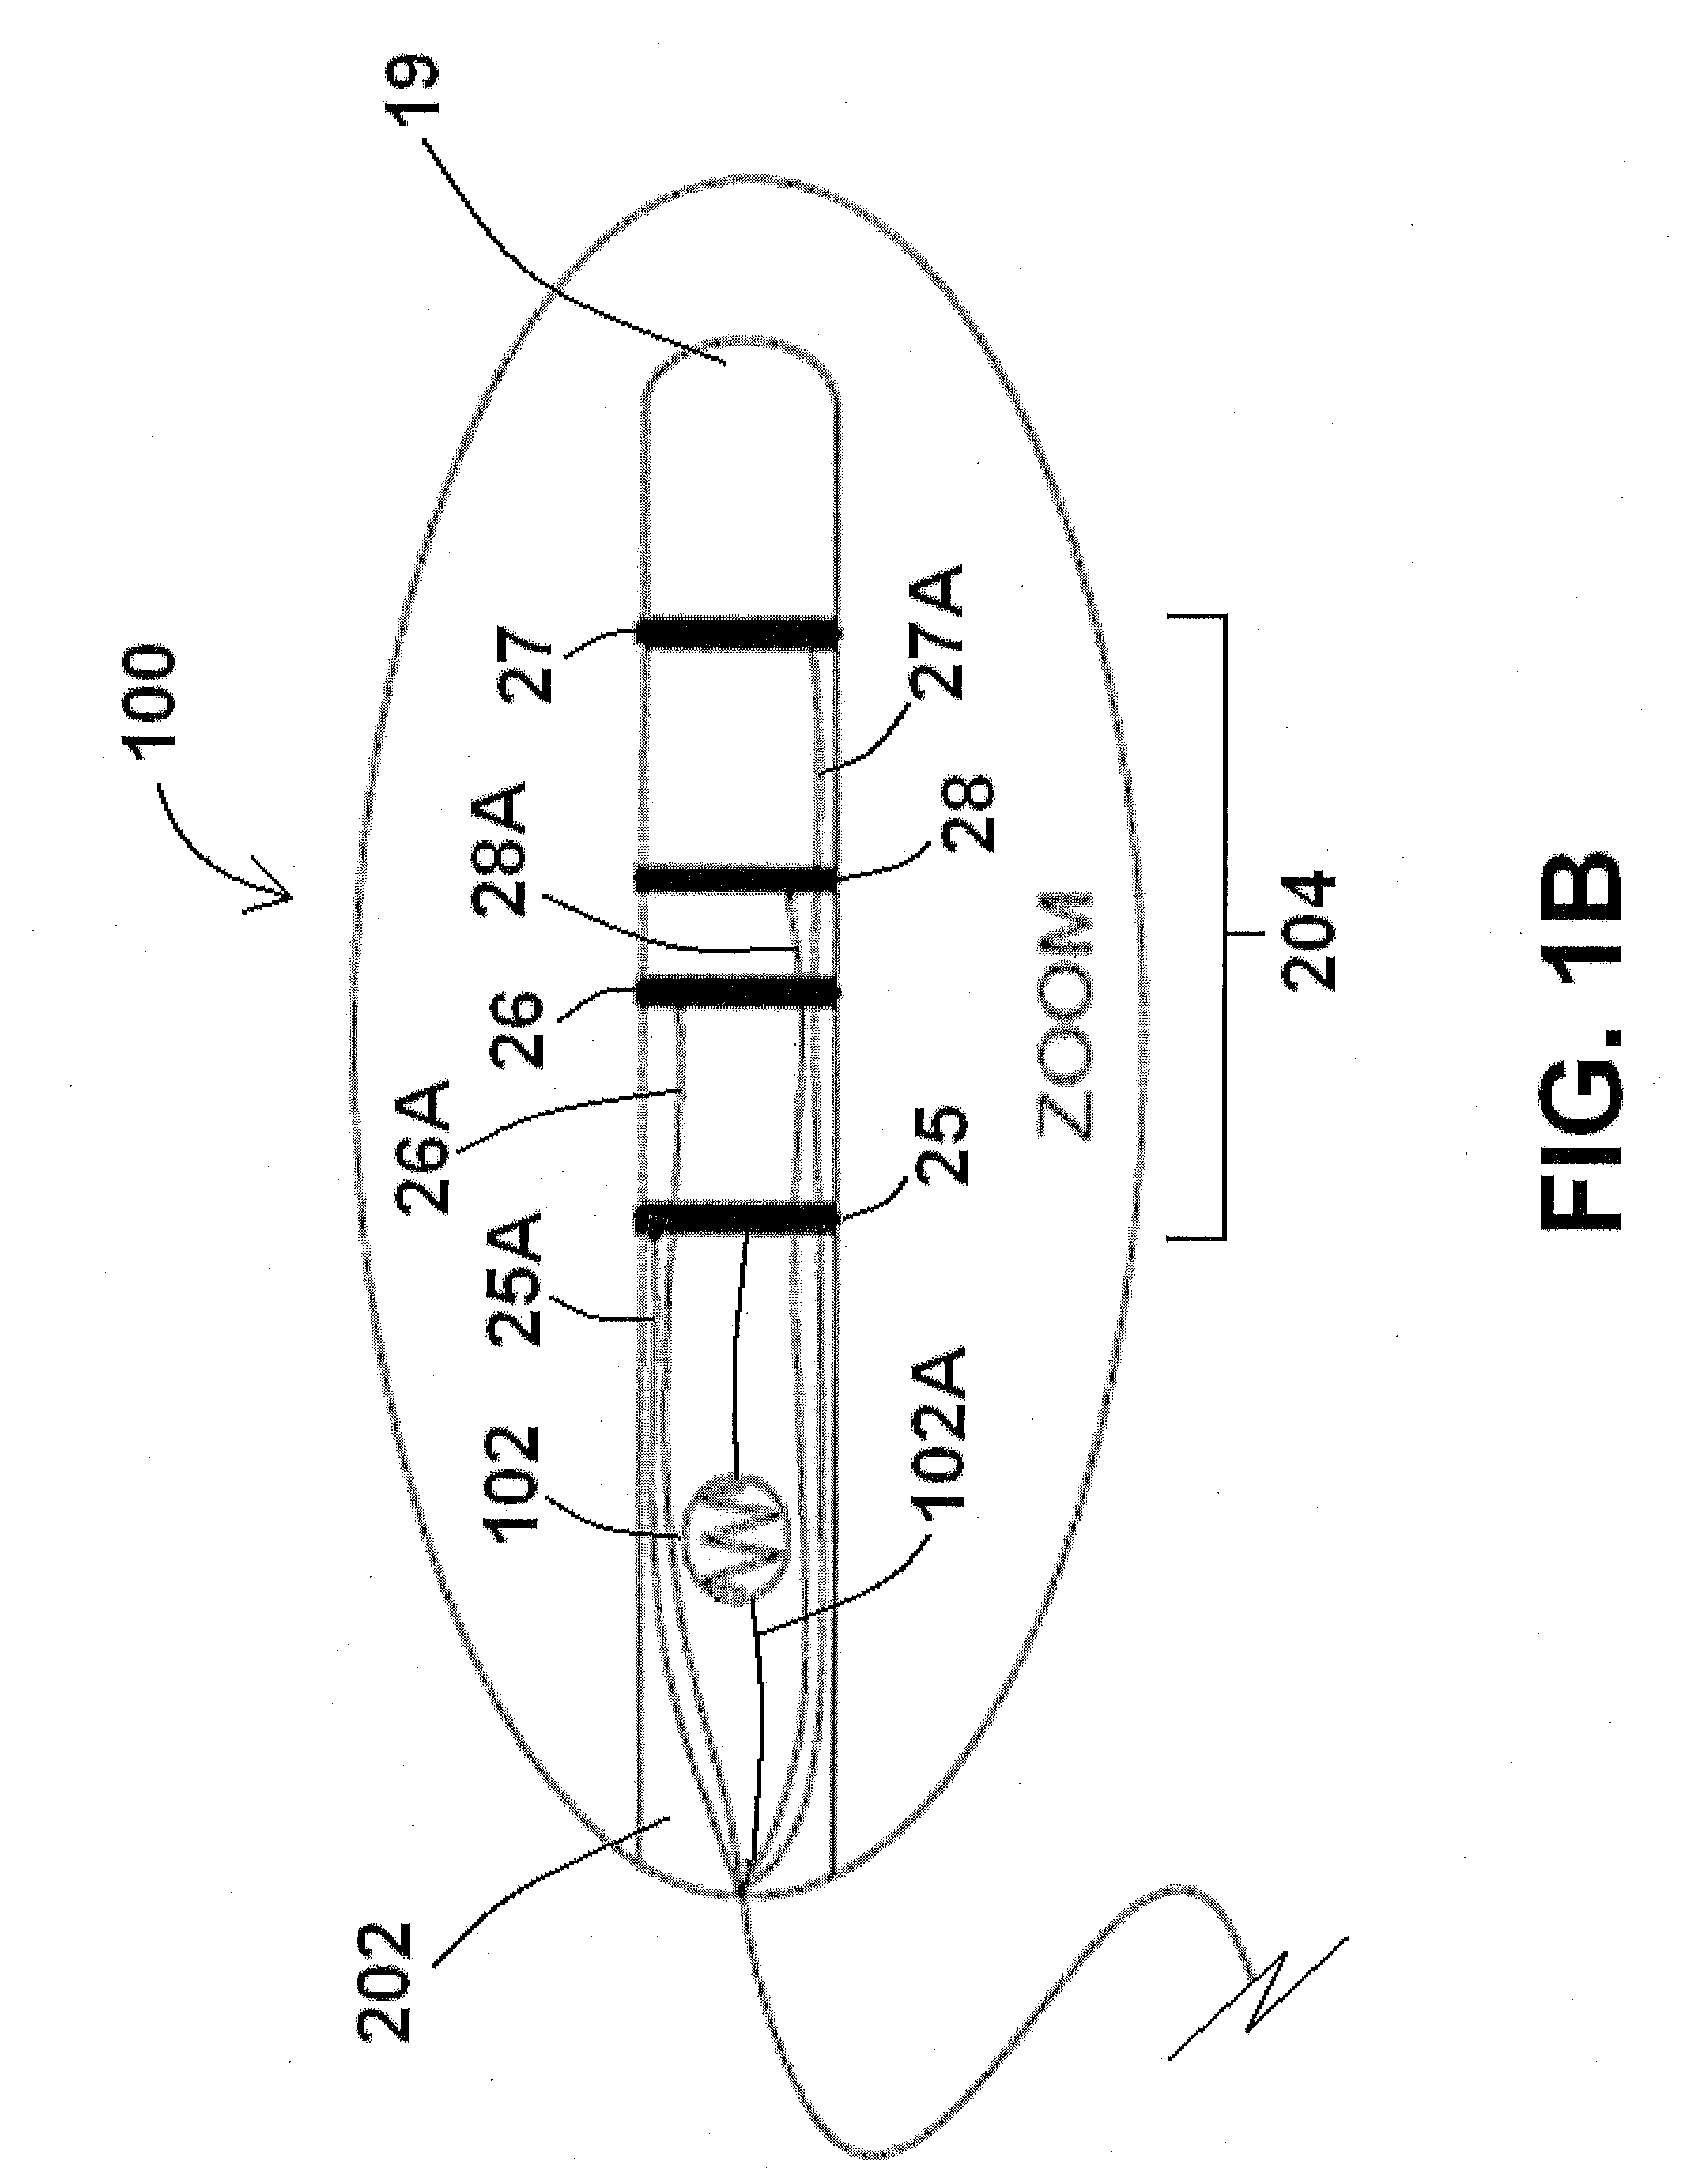 Devices, systems, and methods for measuring parallel tissue conductance, luminal cross-sectional areas, fluid velocity, and/or determining plaque vulnerability using temperature